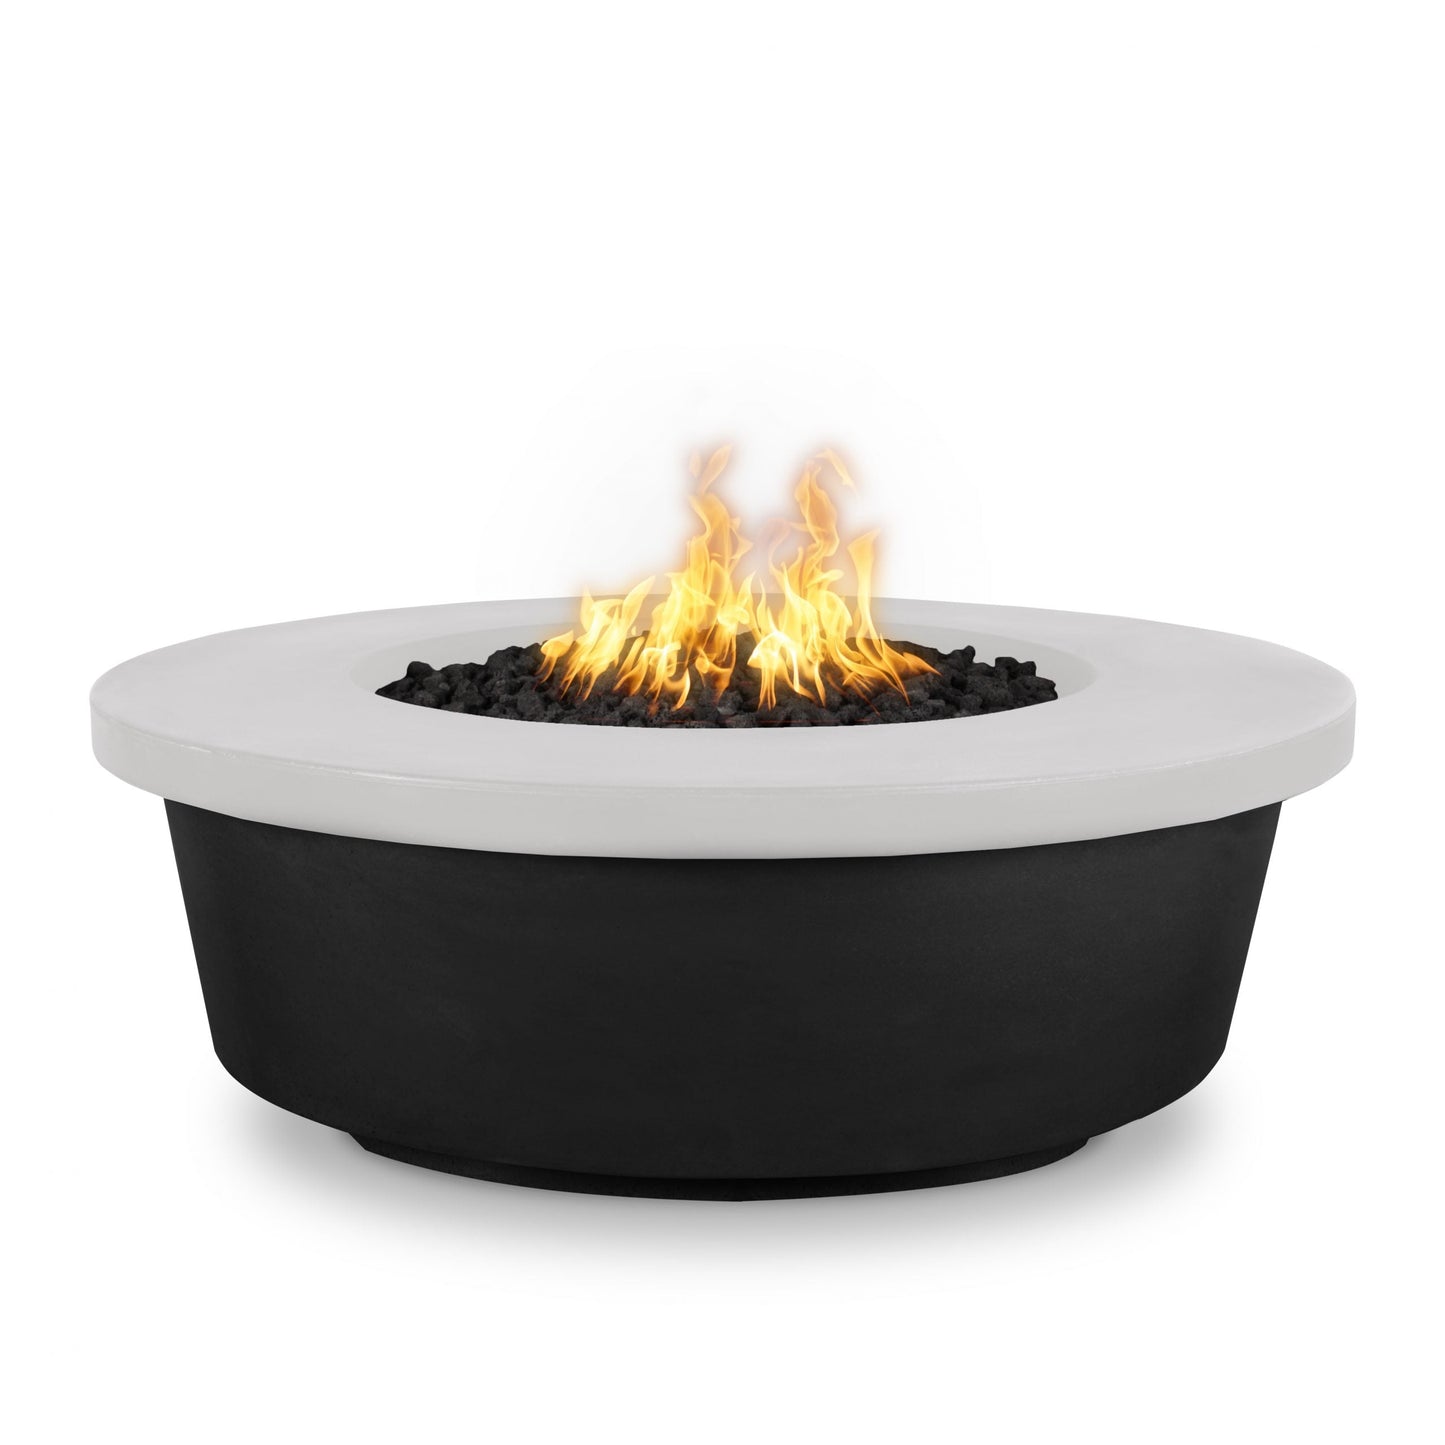 The Outdoor Plus Round Tempe 48" Black & White Powder Coated Liquid Propane Fire Pit with Flame Sense with Spark Ignition